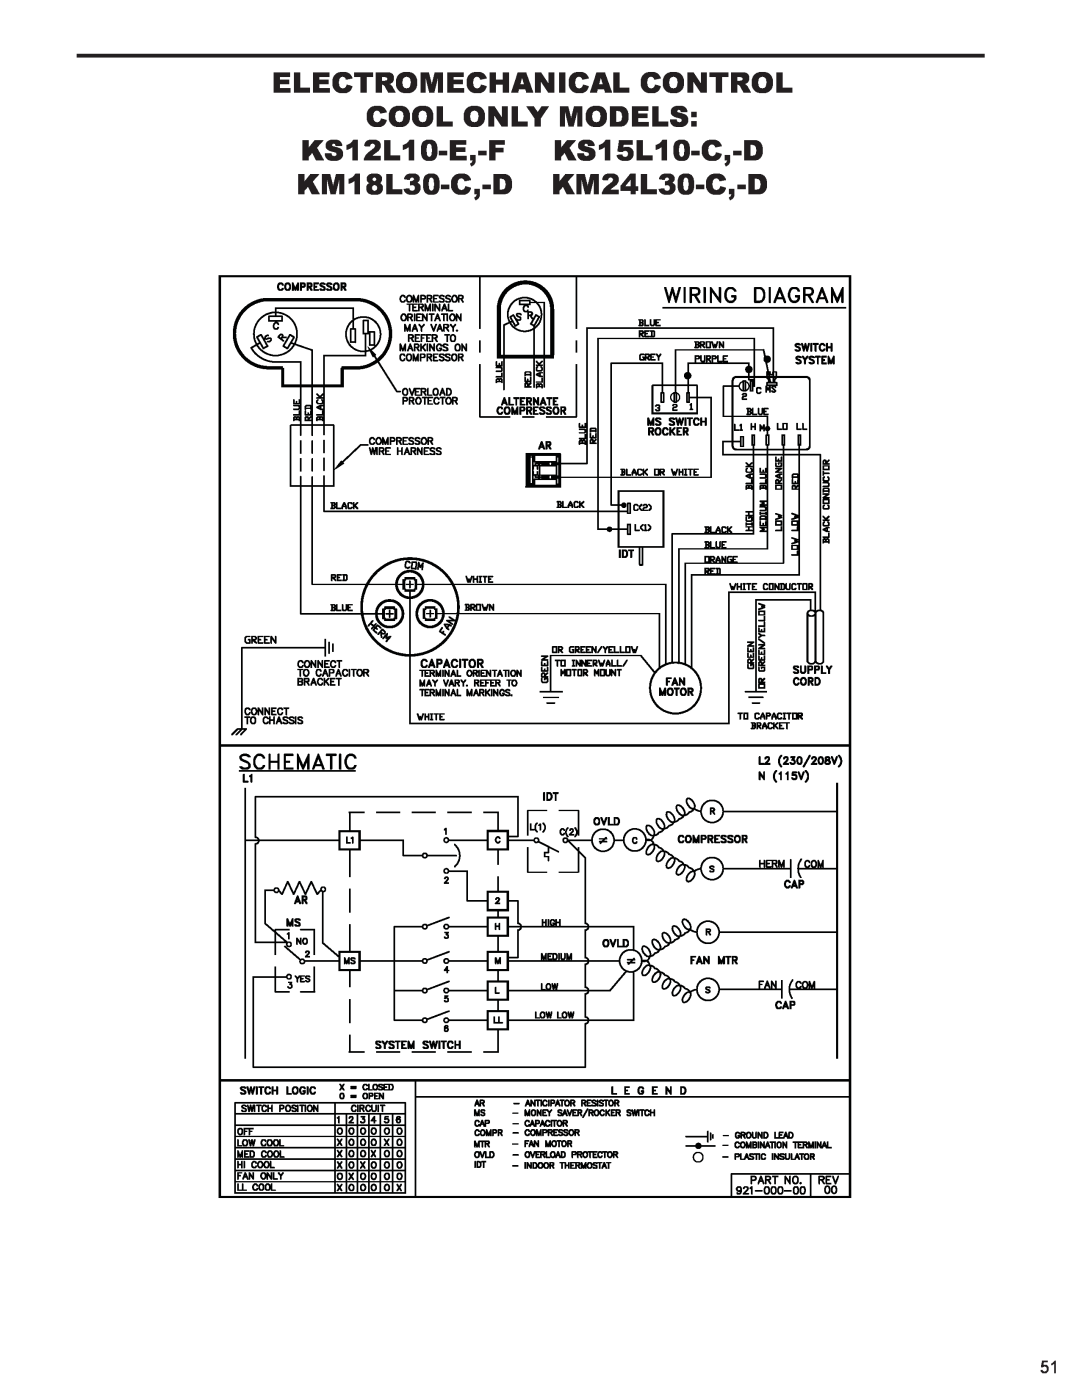 Friedrich 2009, 2008 service manual Electromechanical Control Cool Only Models 